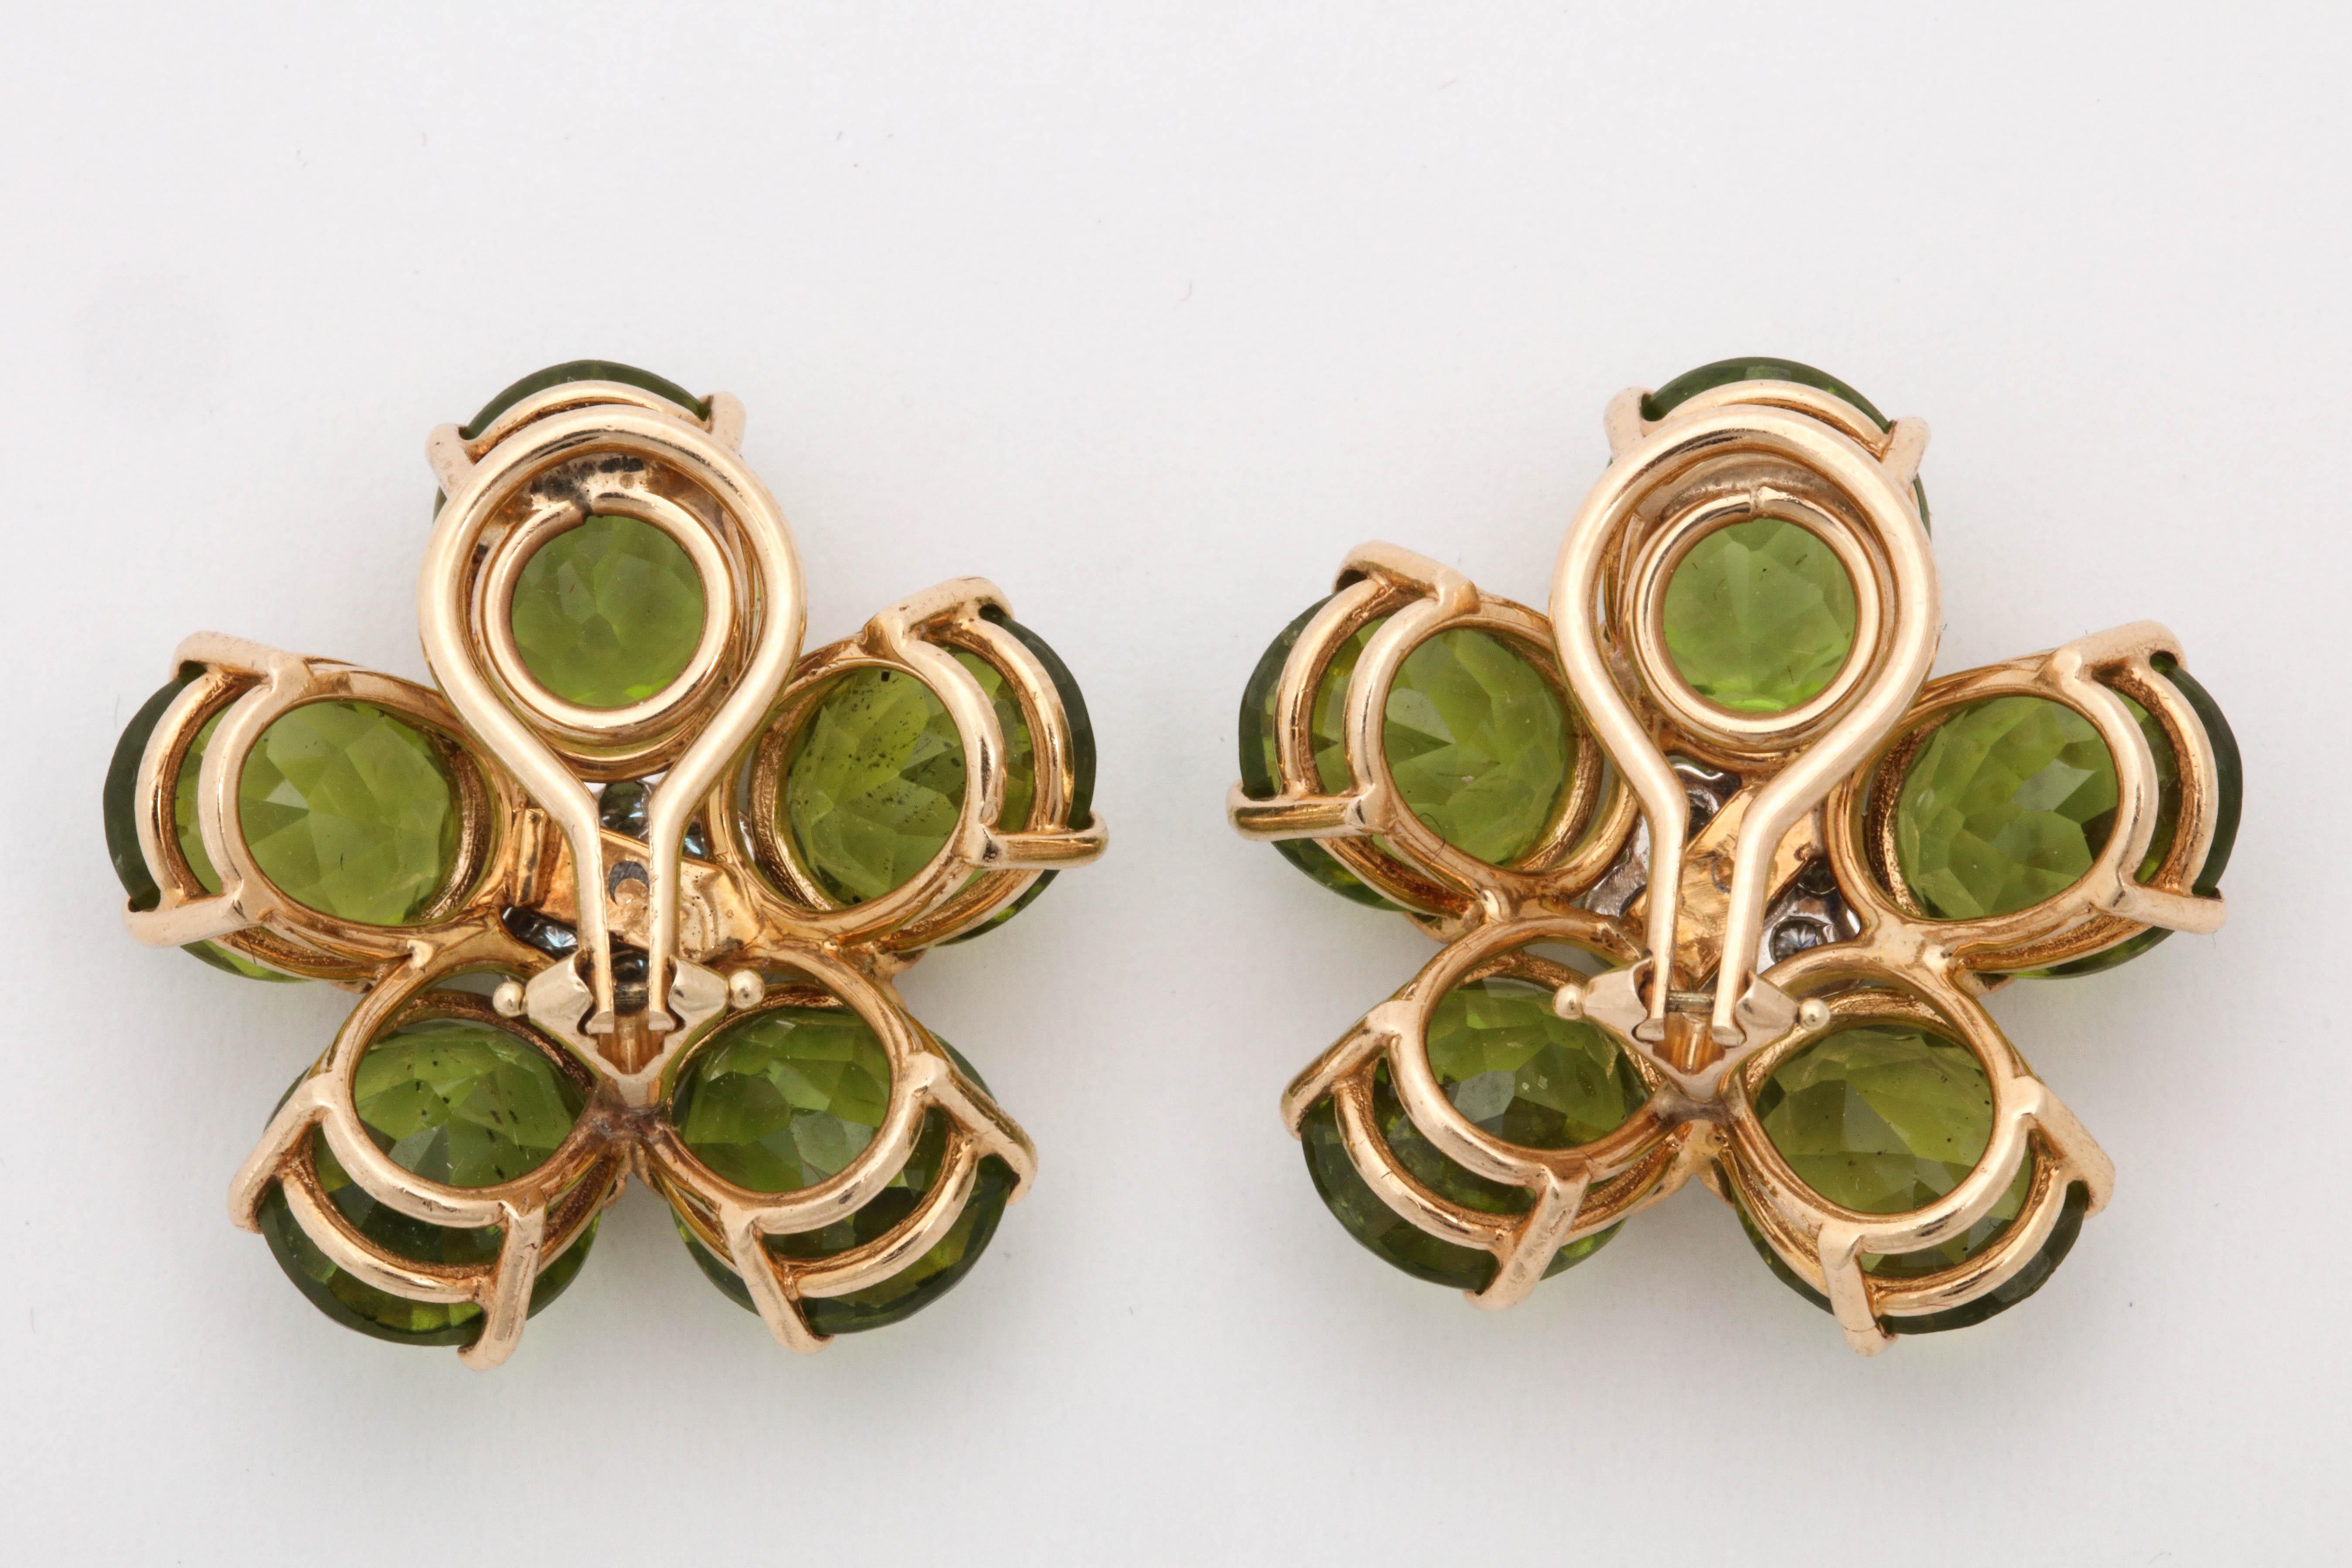 Oval Cut 1960s Figural Floral Peridot with Diamond Centers Gold Clip on Earrings